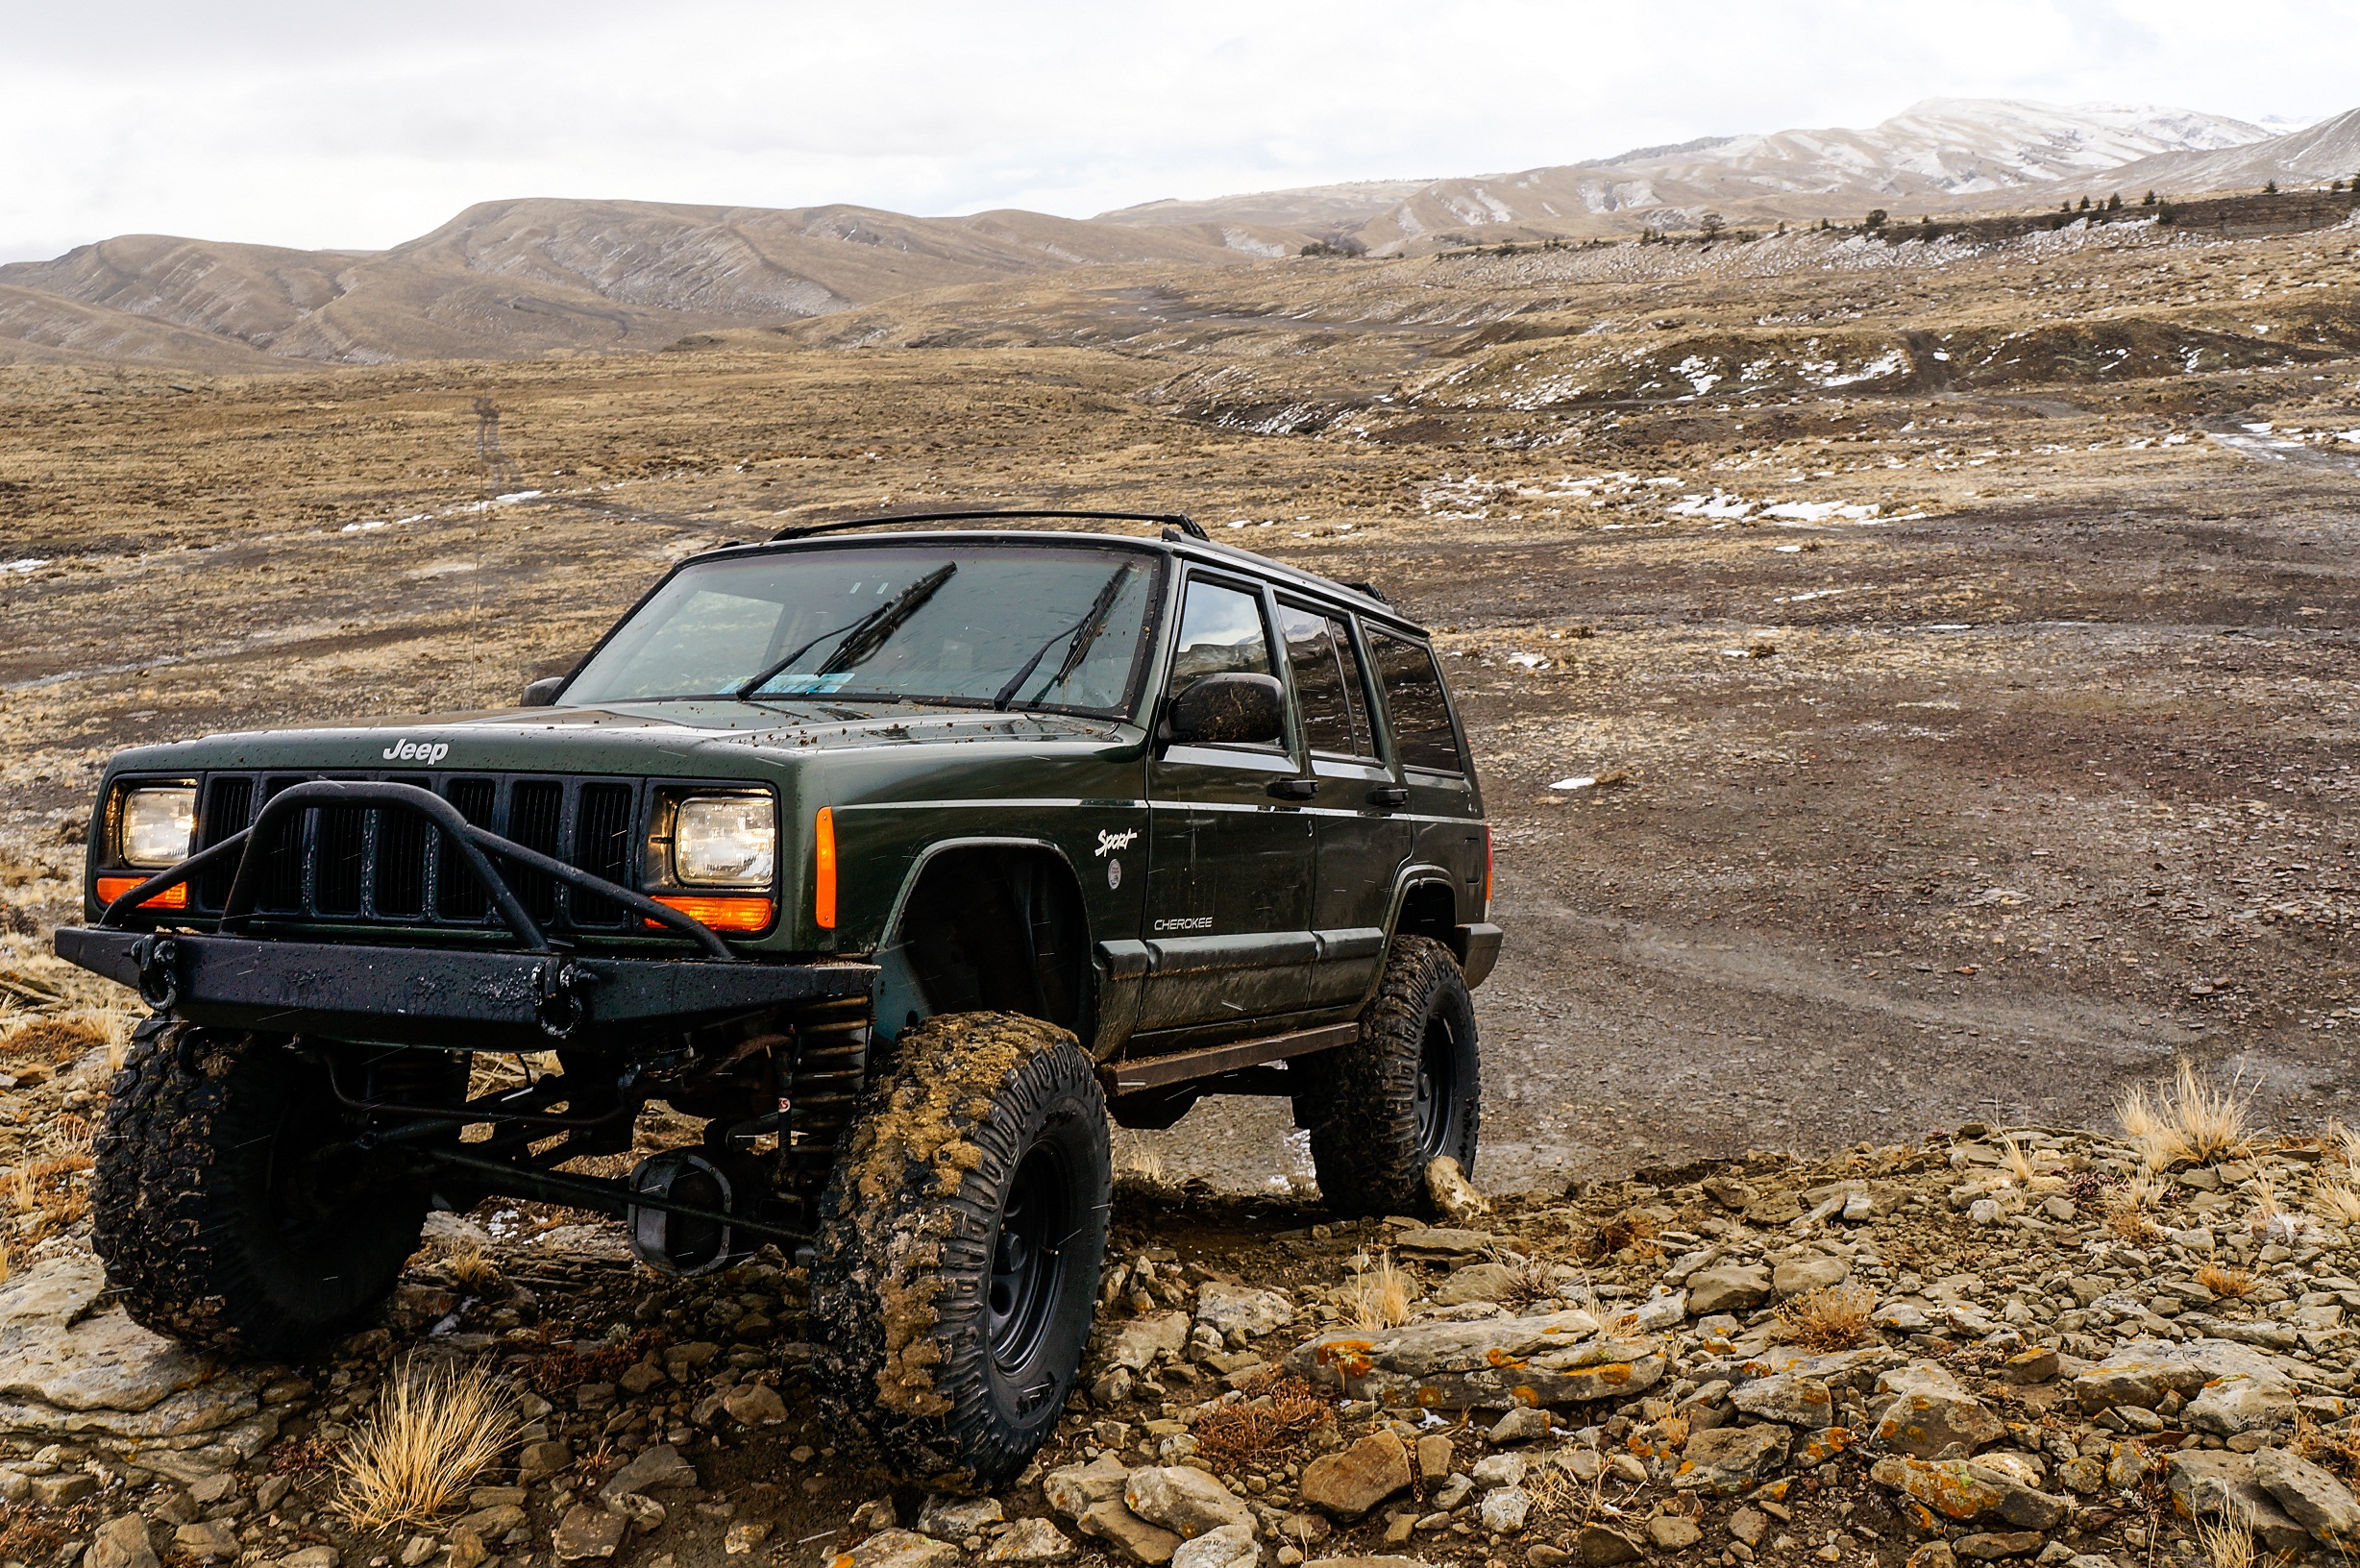 9 Reasons Why You Shouldnt Go To Jeep Xj Wallpaper On Your Own Jeep Xj Wallpaper